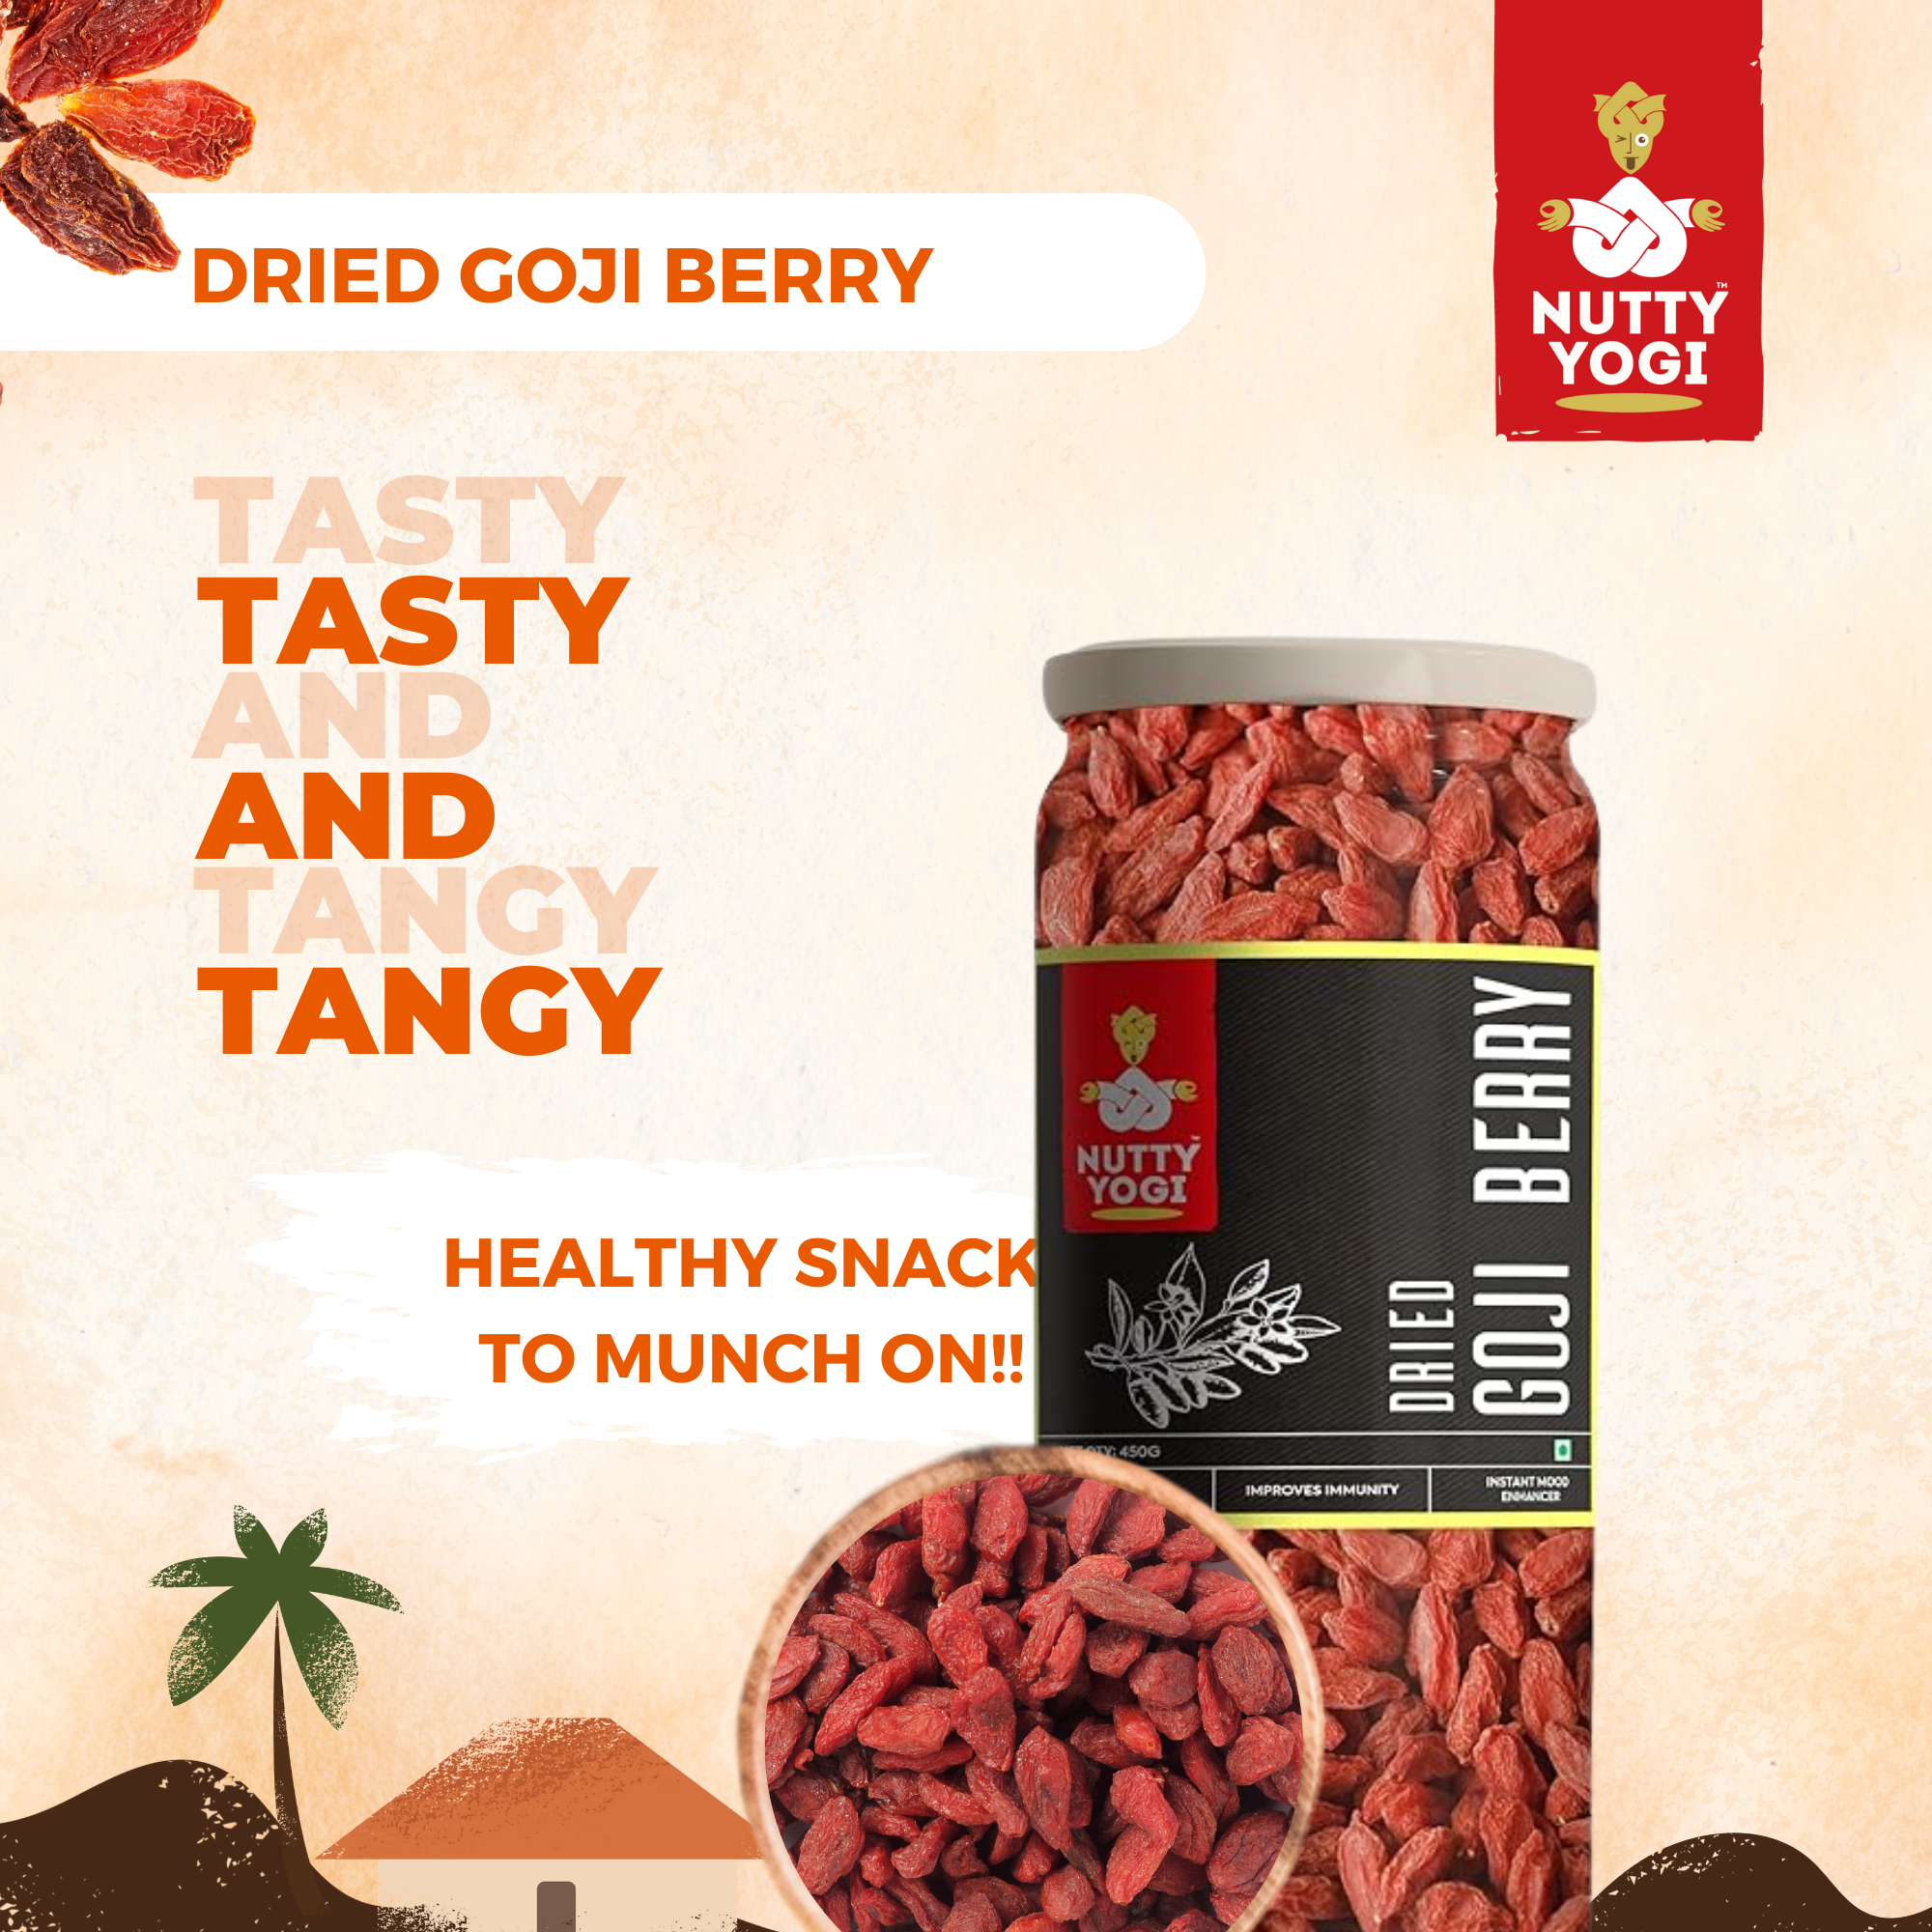 Nutty Yogi Dried Goji Berries, 450g (Unsweetened | Garnish or Add to Fruit Salads, Oatmeal, Mueslis, Trail Mixes, Ice creams, Baked Goods)